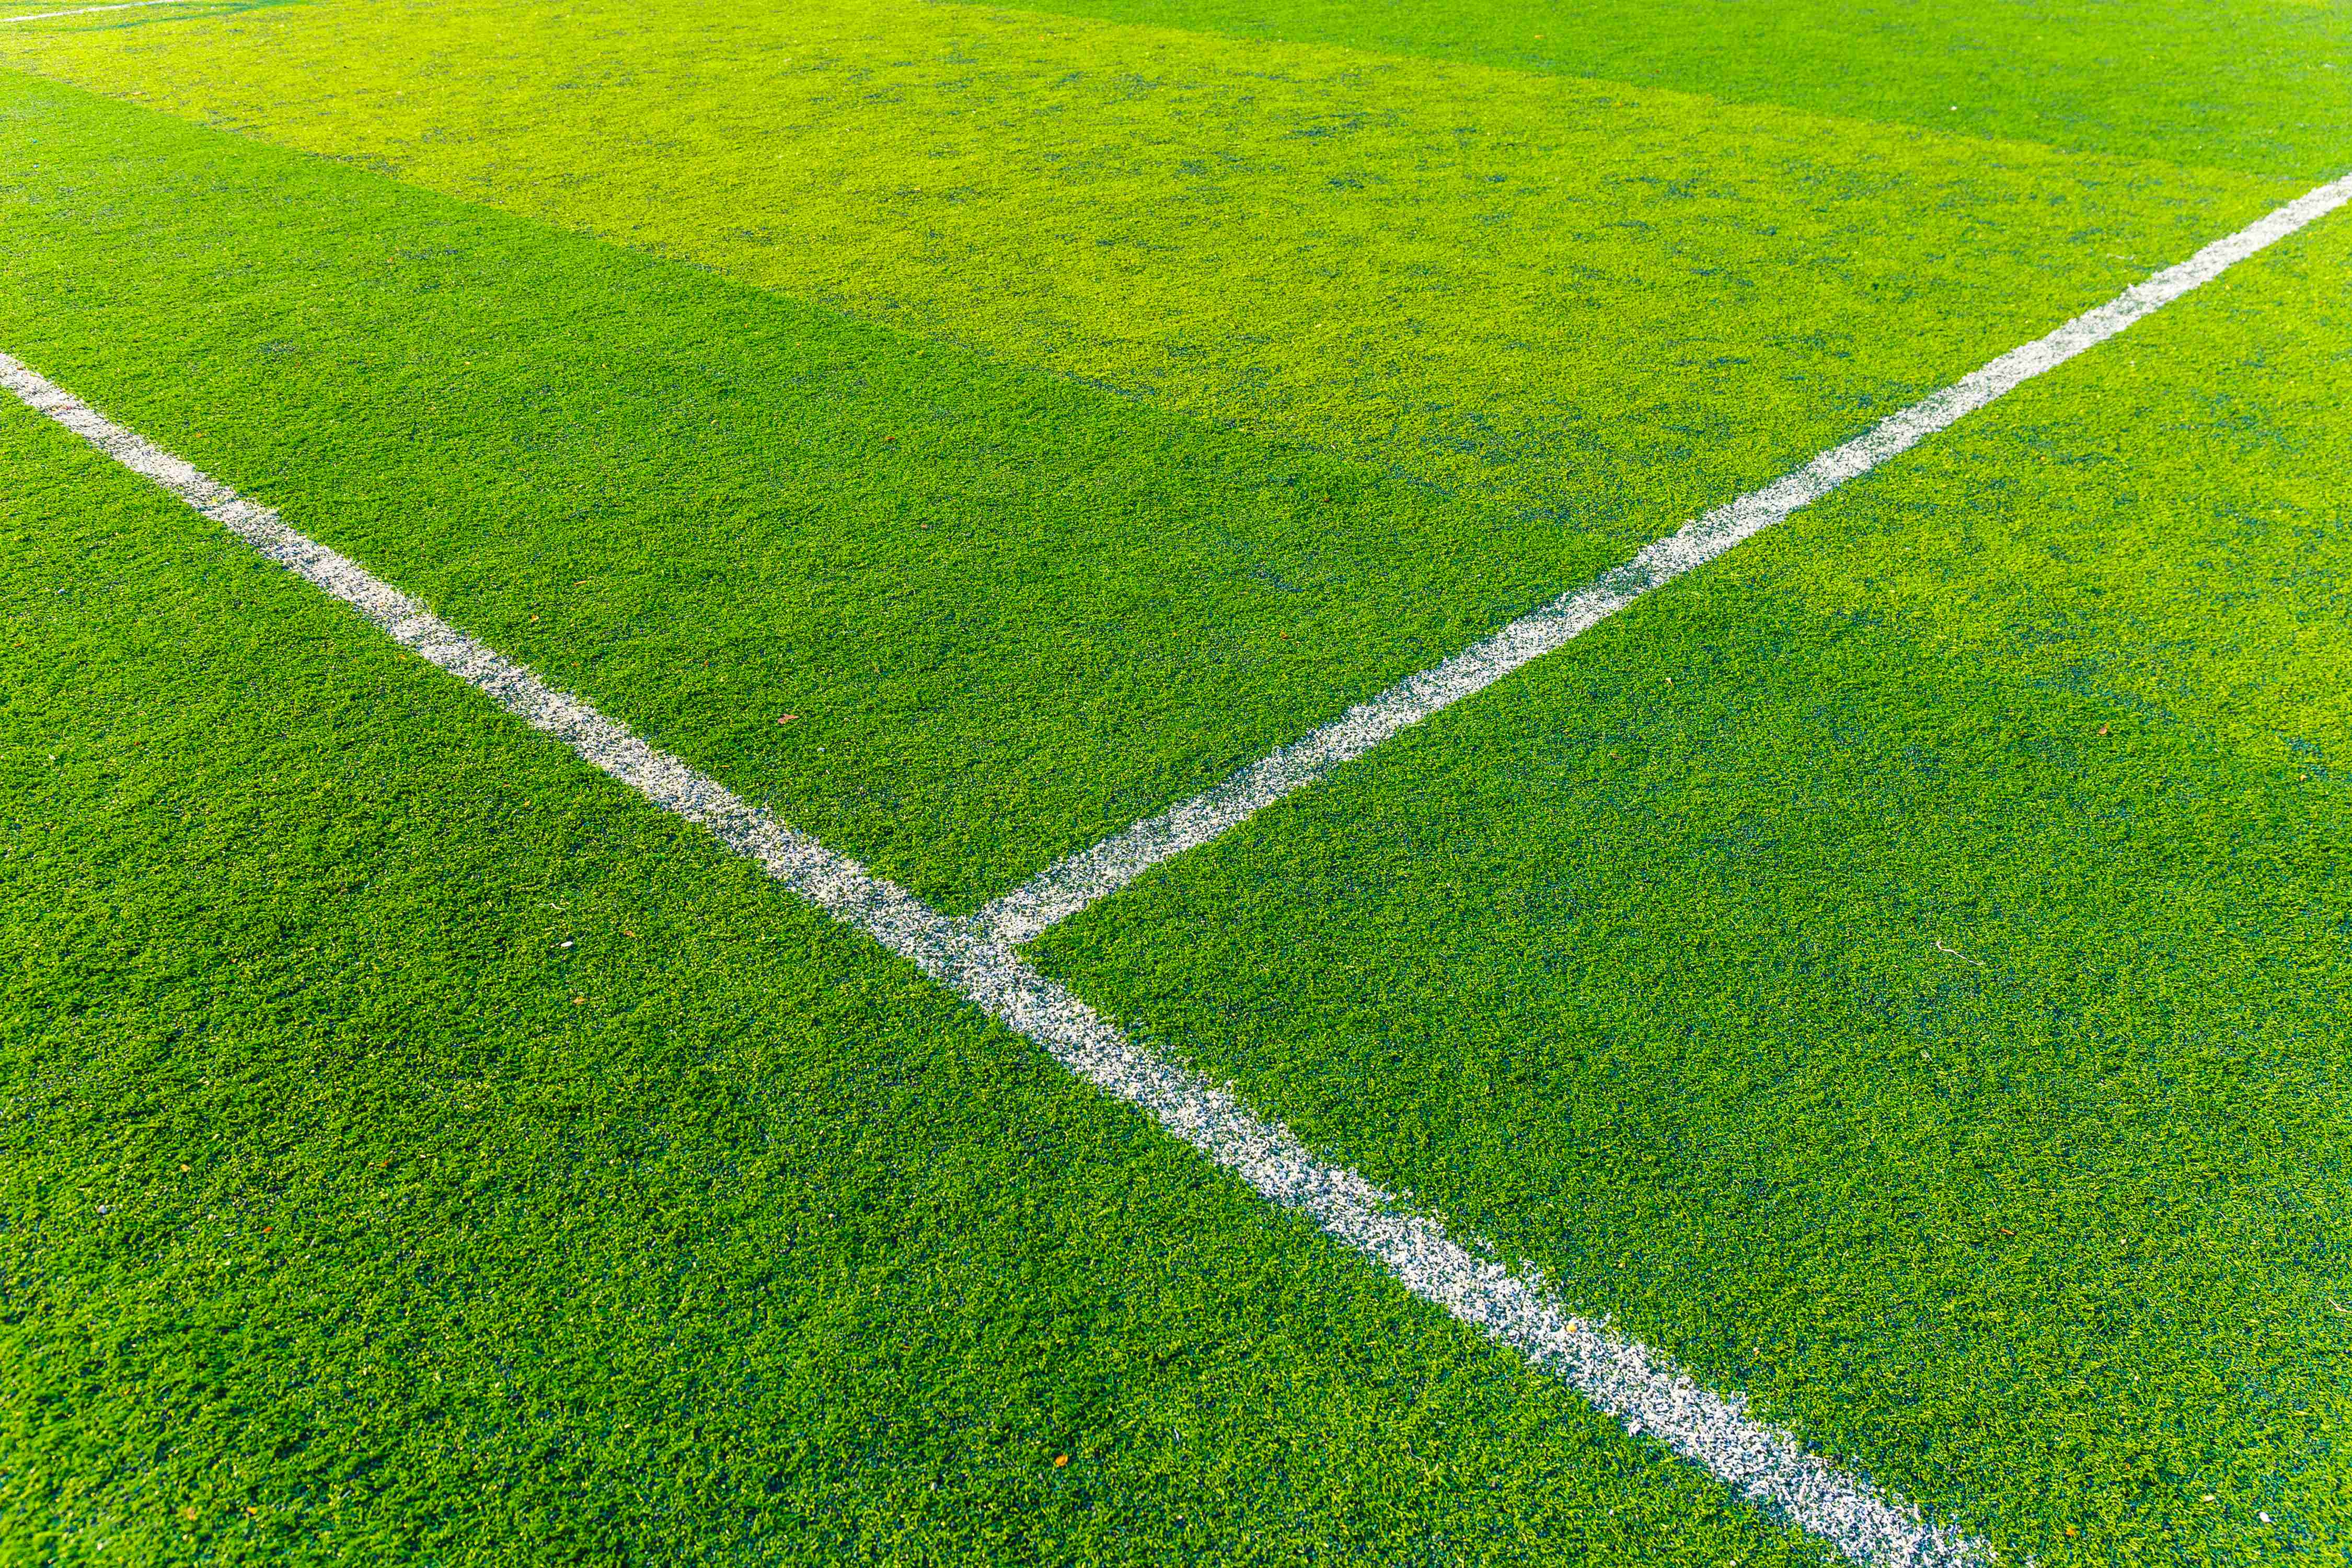 What Sports Use Artificial Grass?